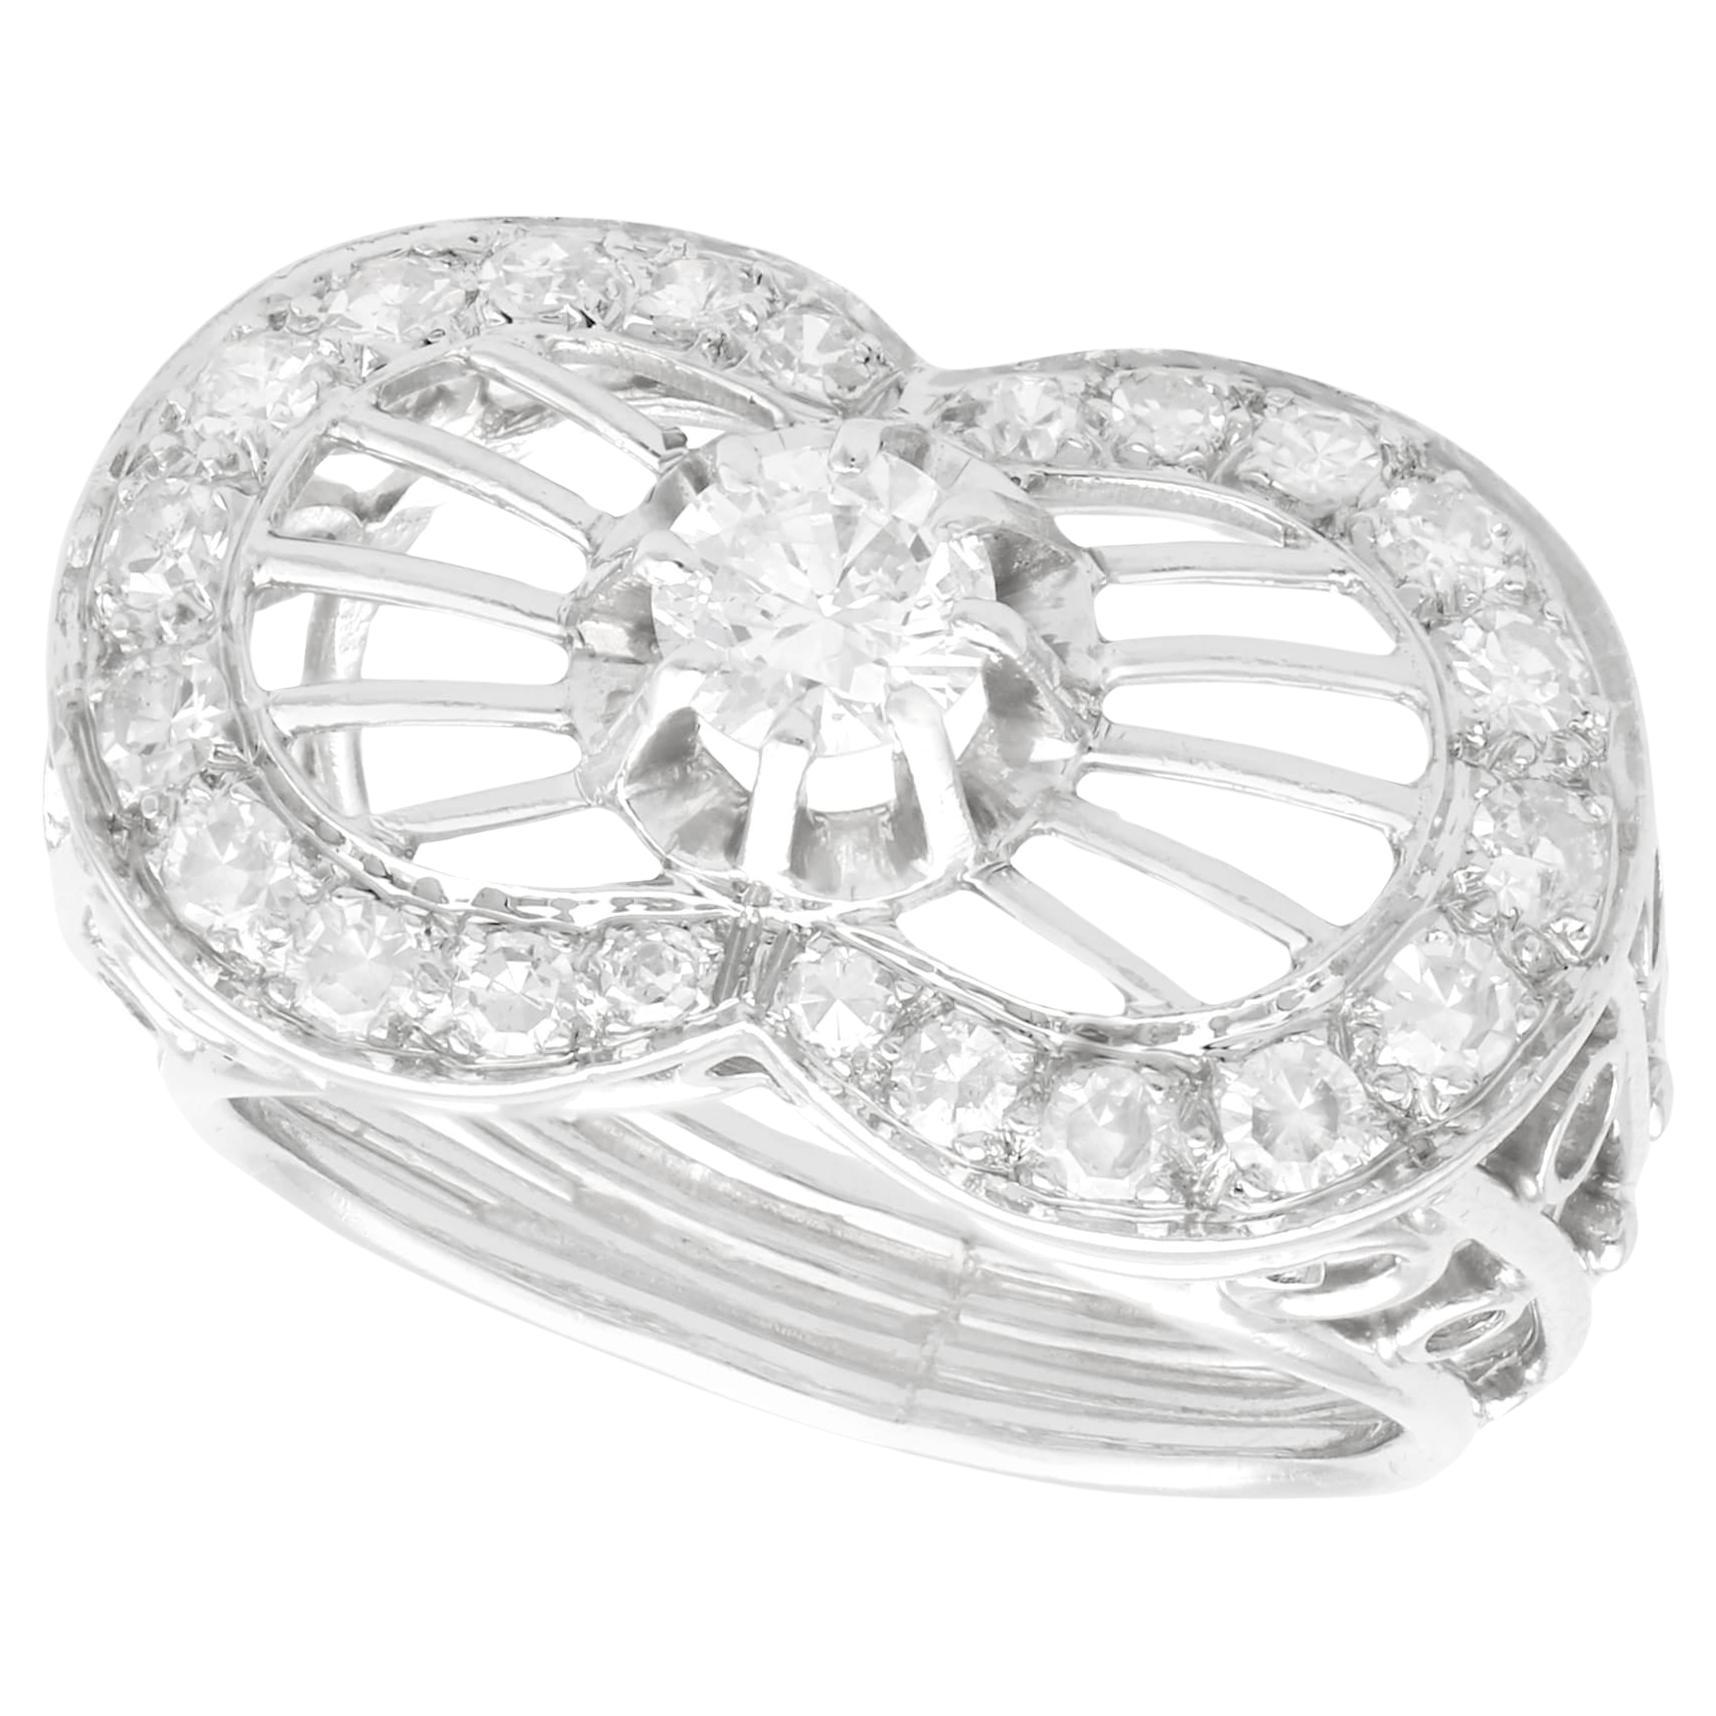 1940s, 1.06 Carat Diamond and Platinum Cocktail Ring For Sale